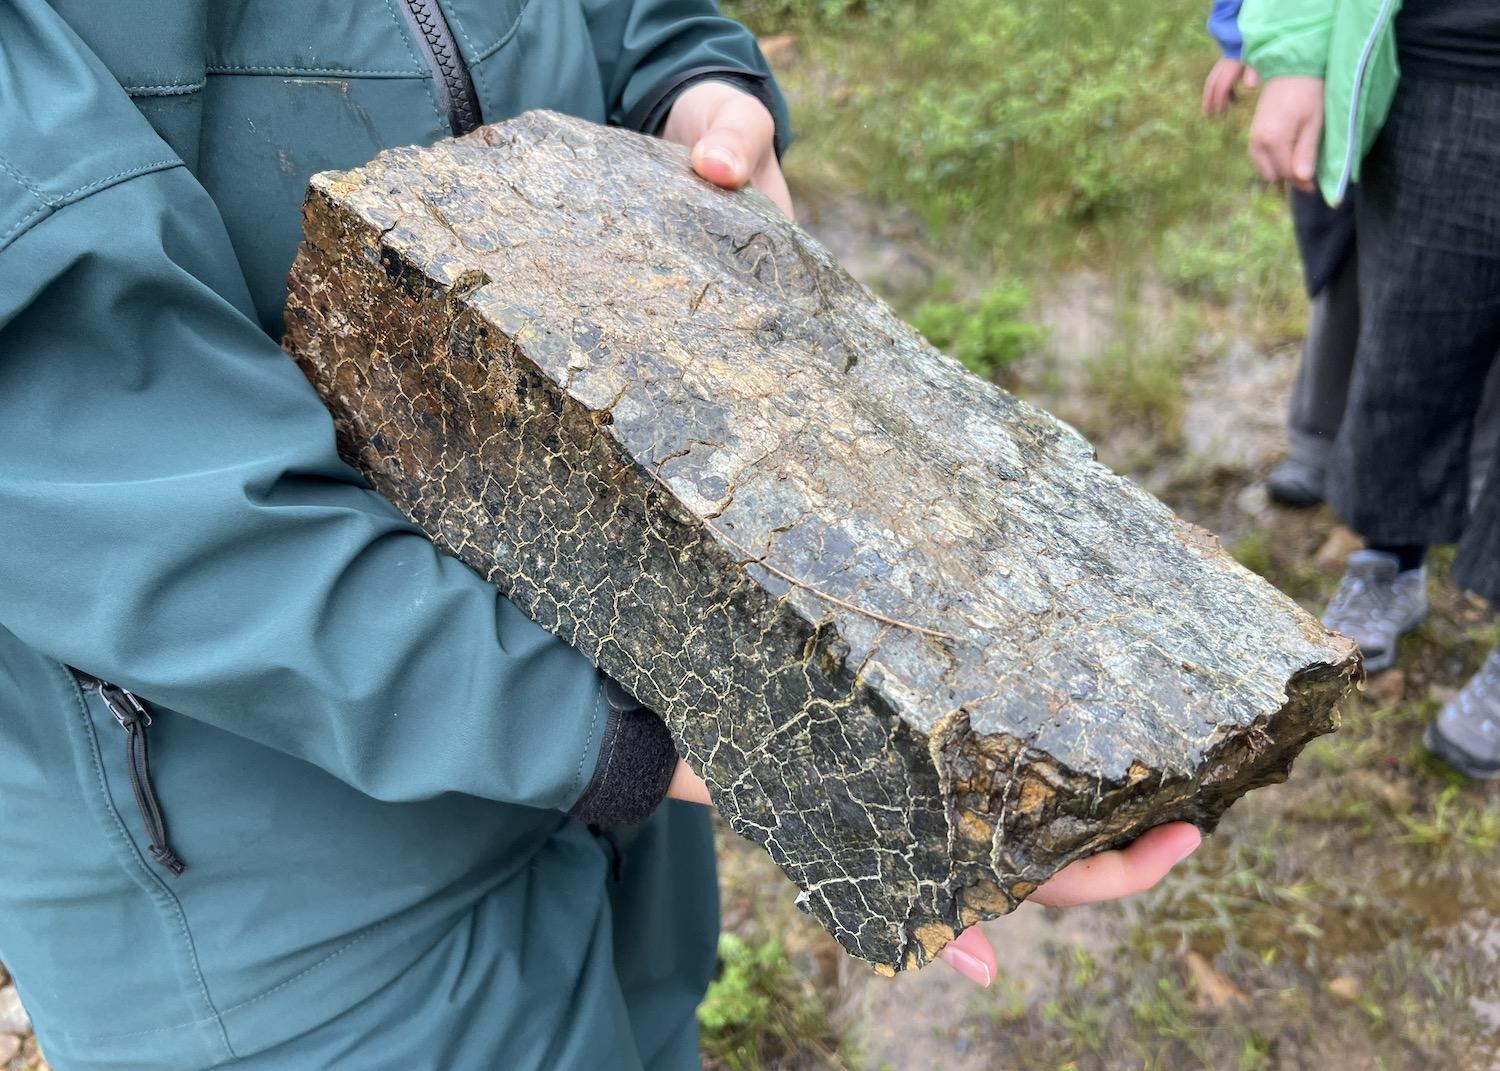 The metamorphism of peridotite to serpentinite — which looks like snakeskin — is still taking place inside the Tablelands.